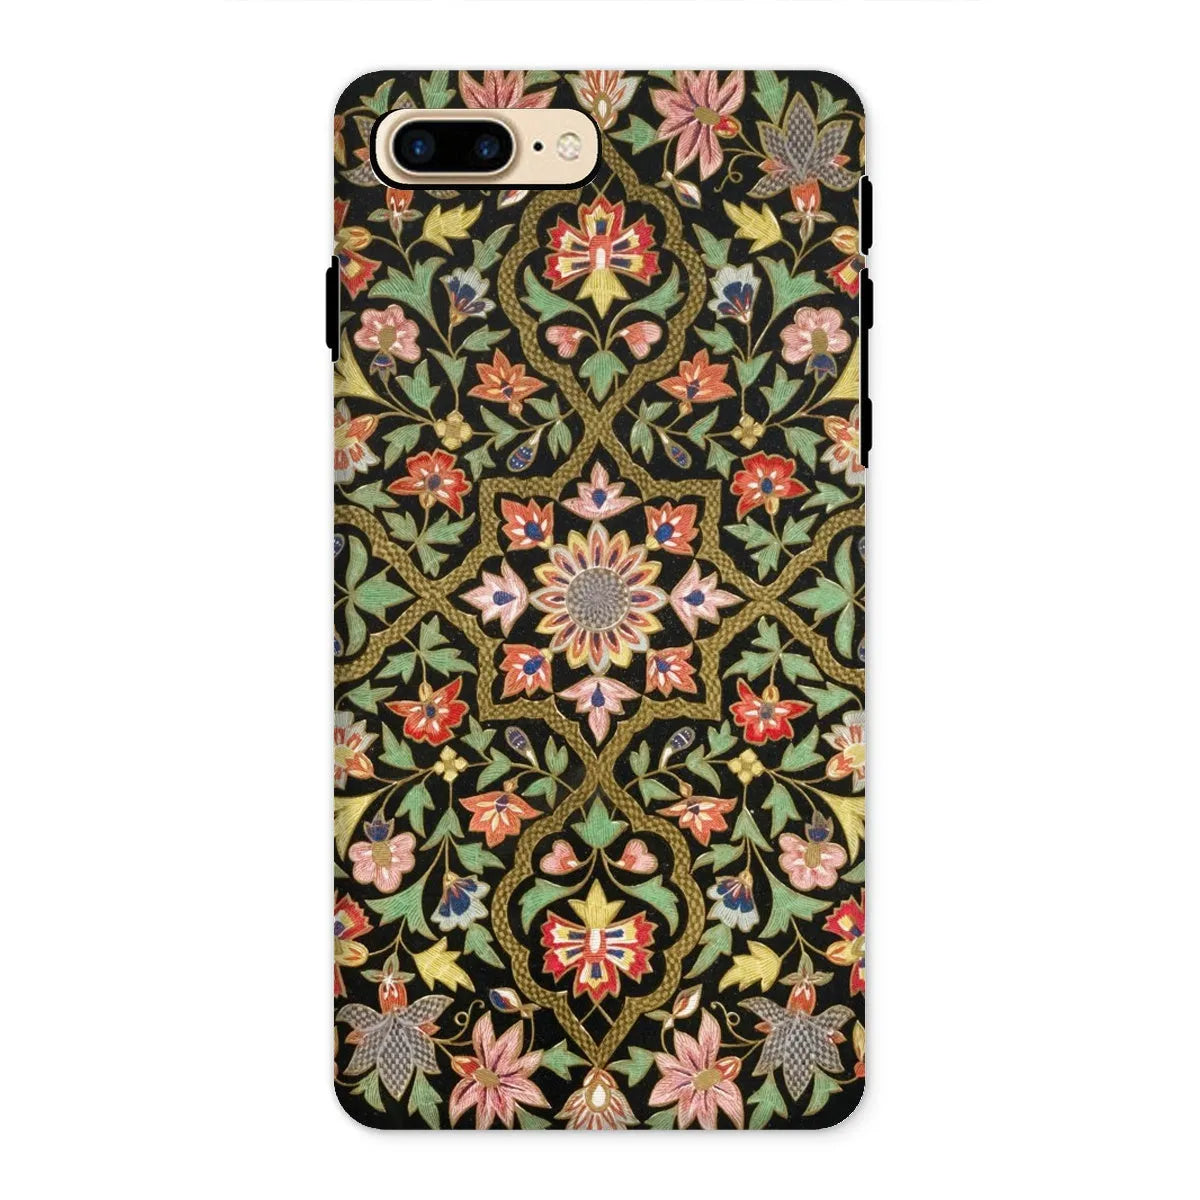 Indian Embroidery - Aesthetic Pattern Art Phone Case - Iphone 8 Plus / Matte - Mobile Phone Cases - Aesthetic Art